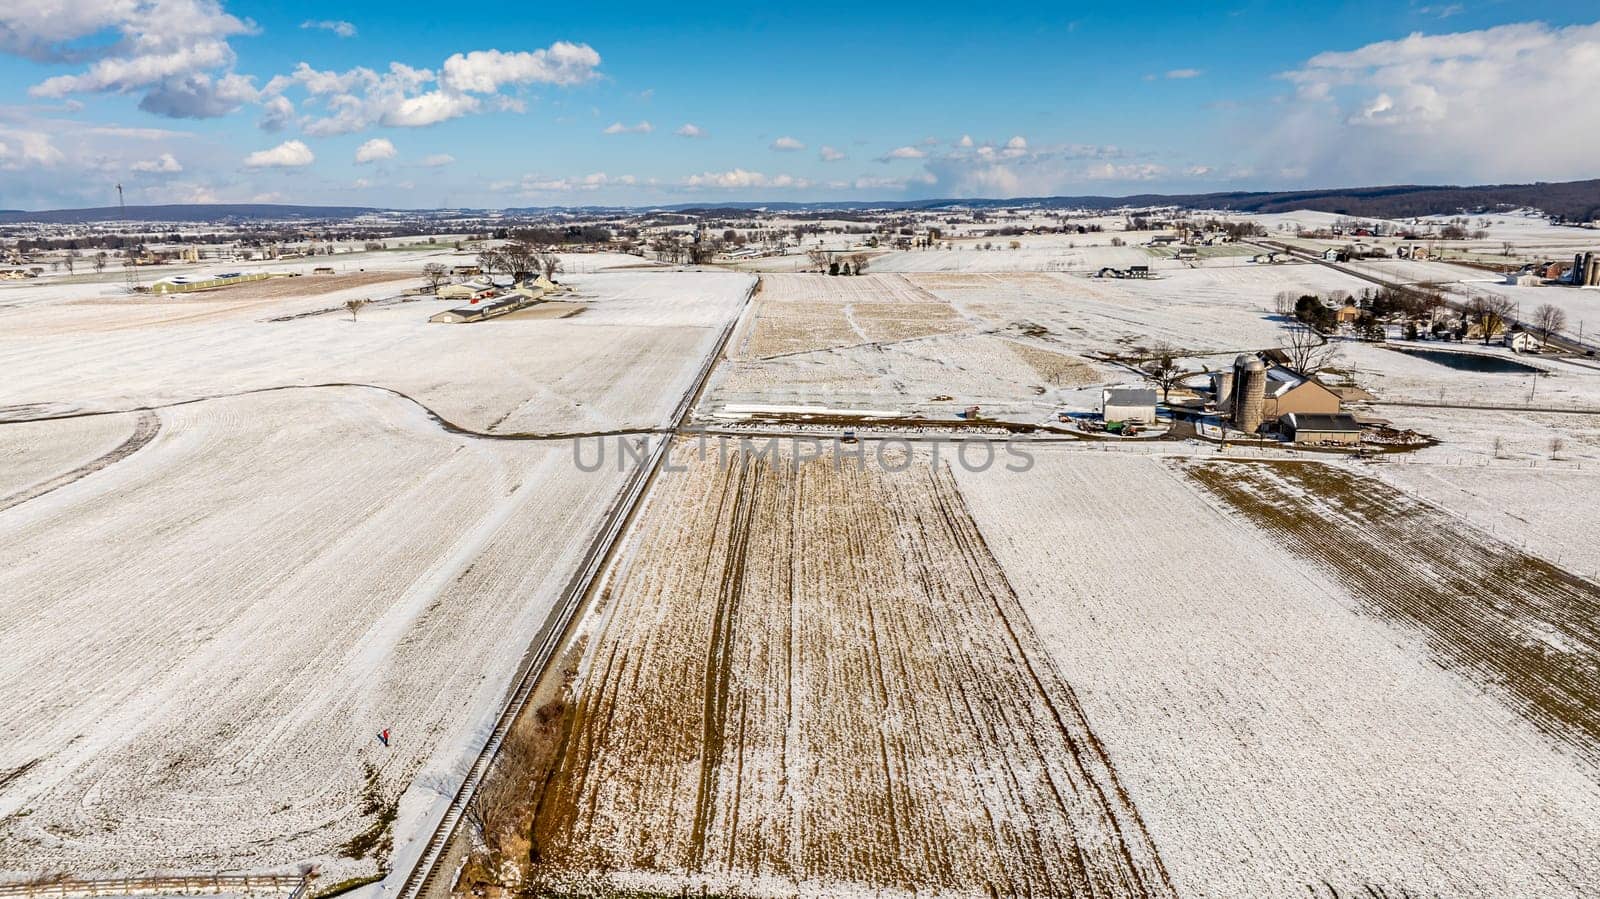 An Aerial View Of Expansive Snow-Dusted Farmland With Rural Buildings And Silos.